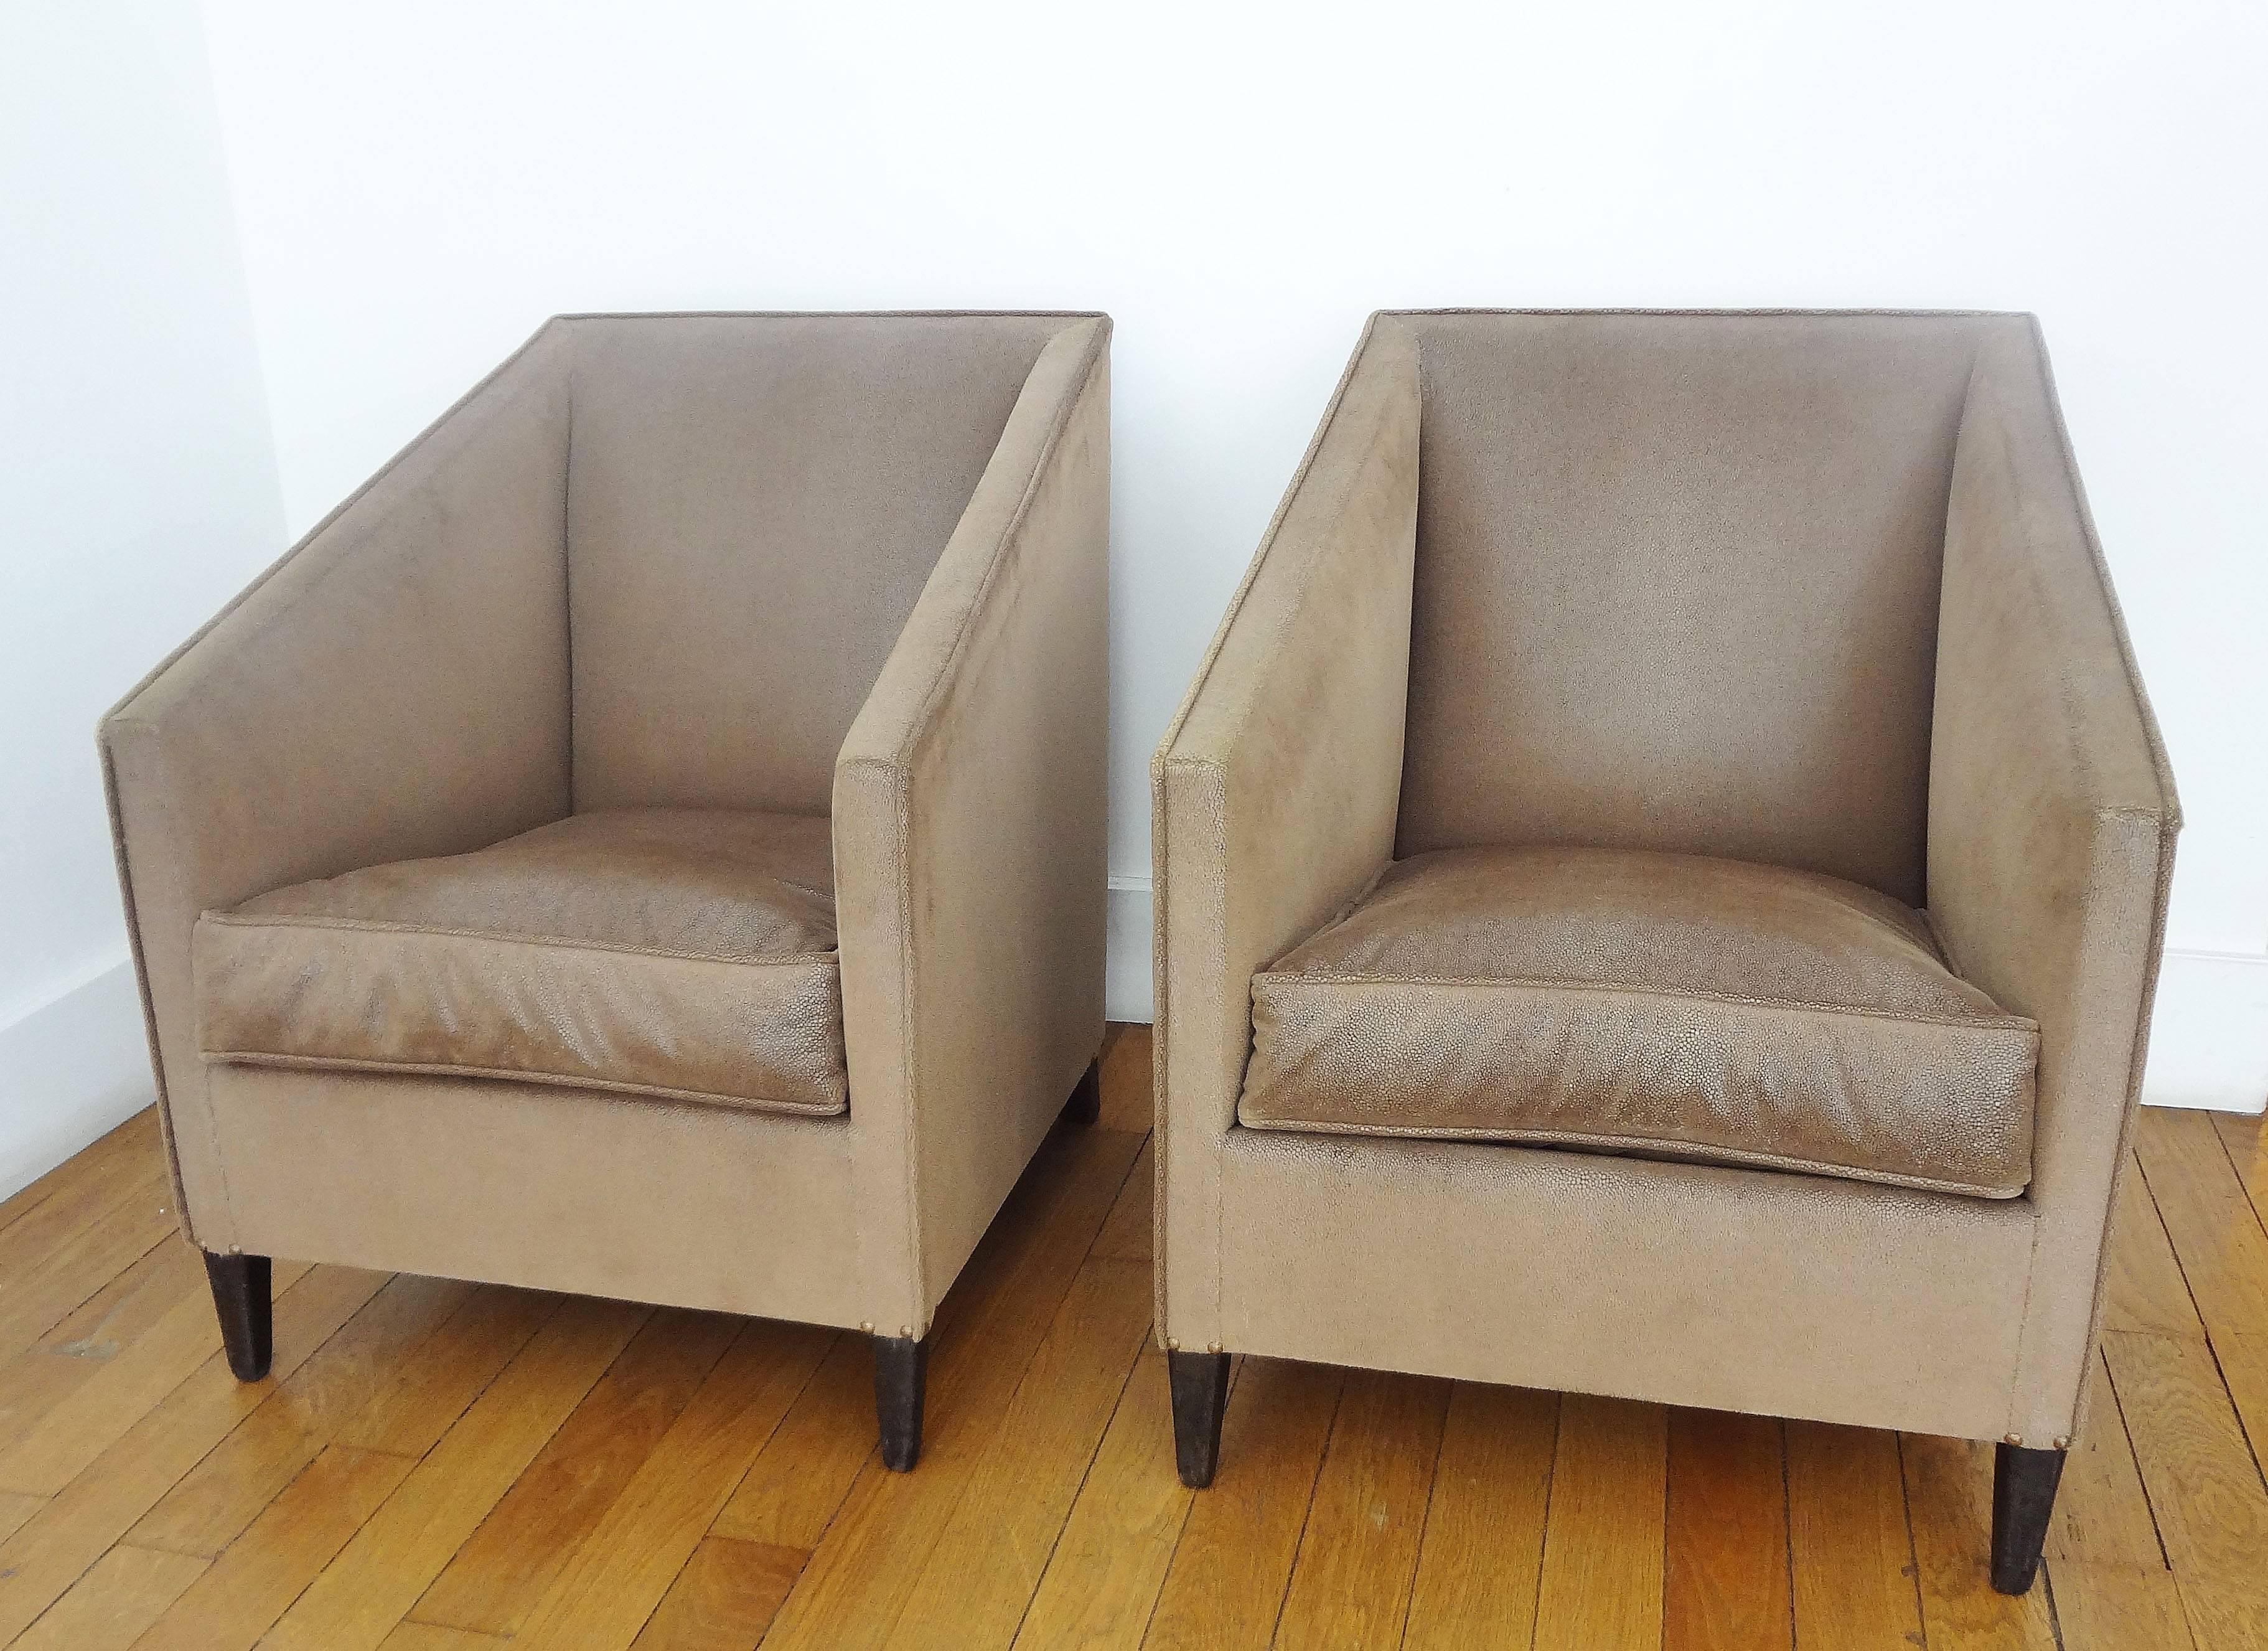 Early 20th Century Pair of Modernist Armchairs, 1920s, by Francis Jourdain For Sale